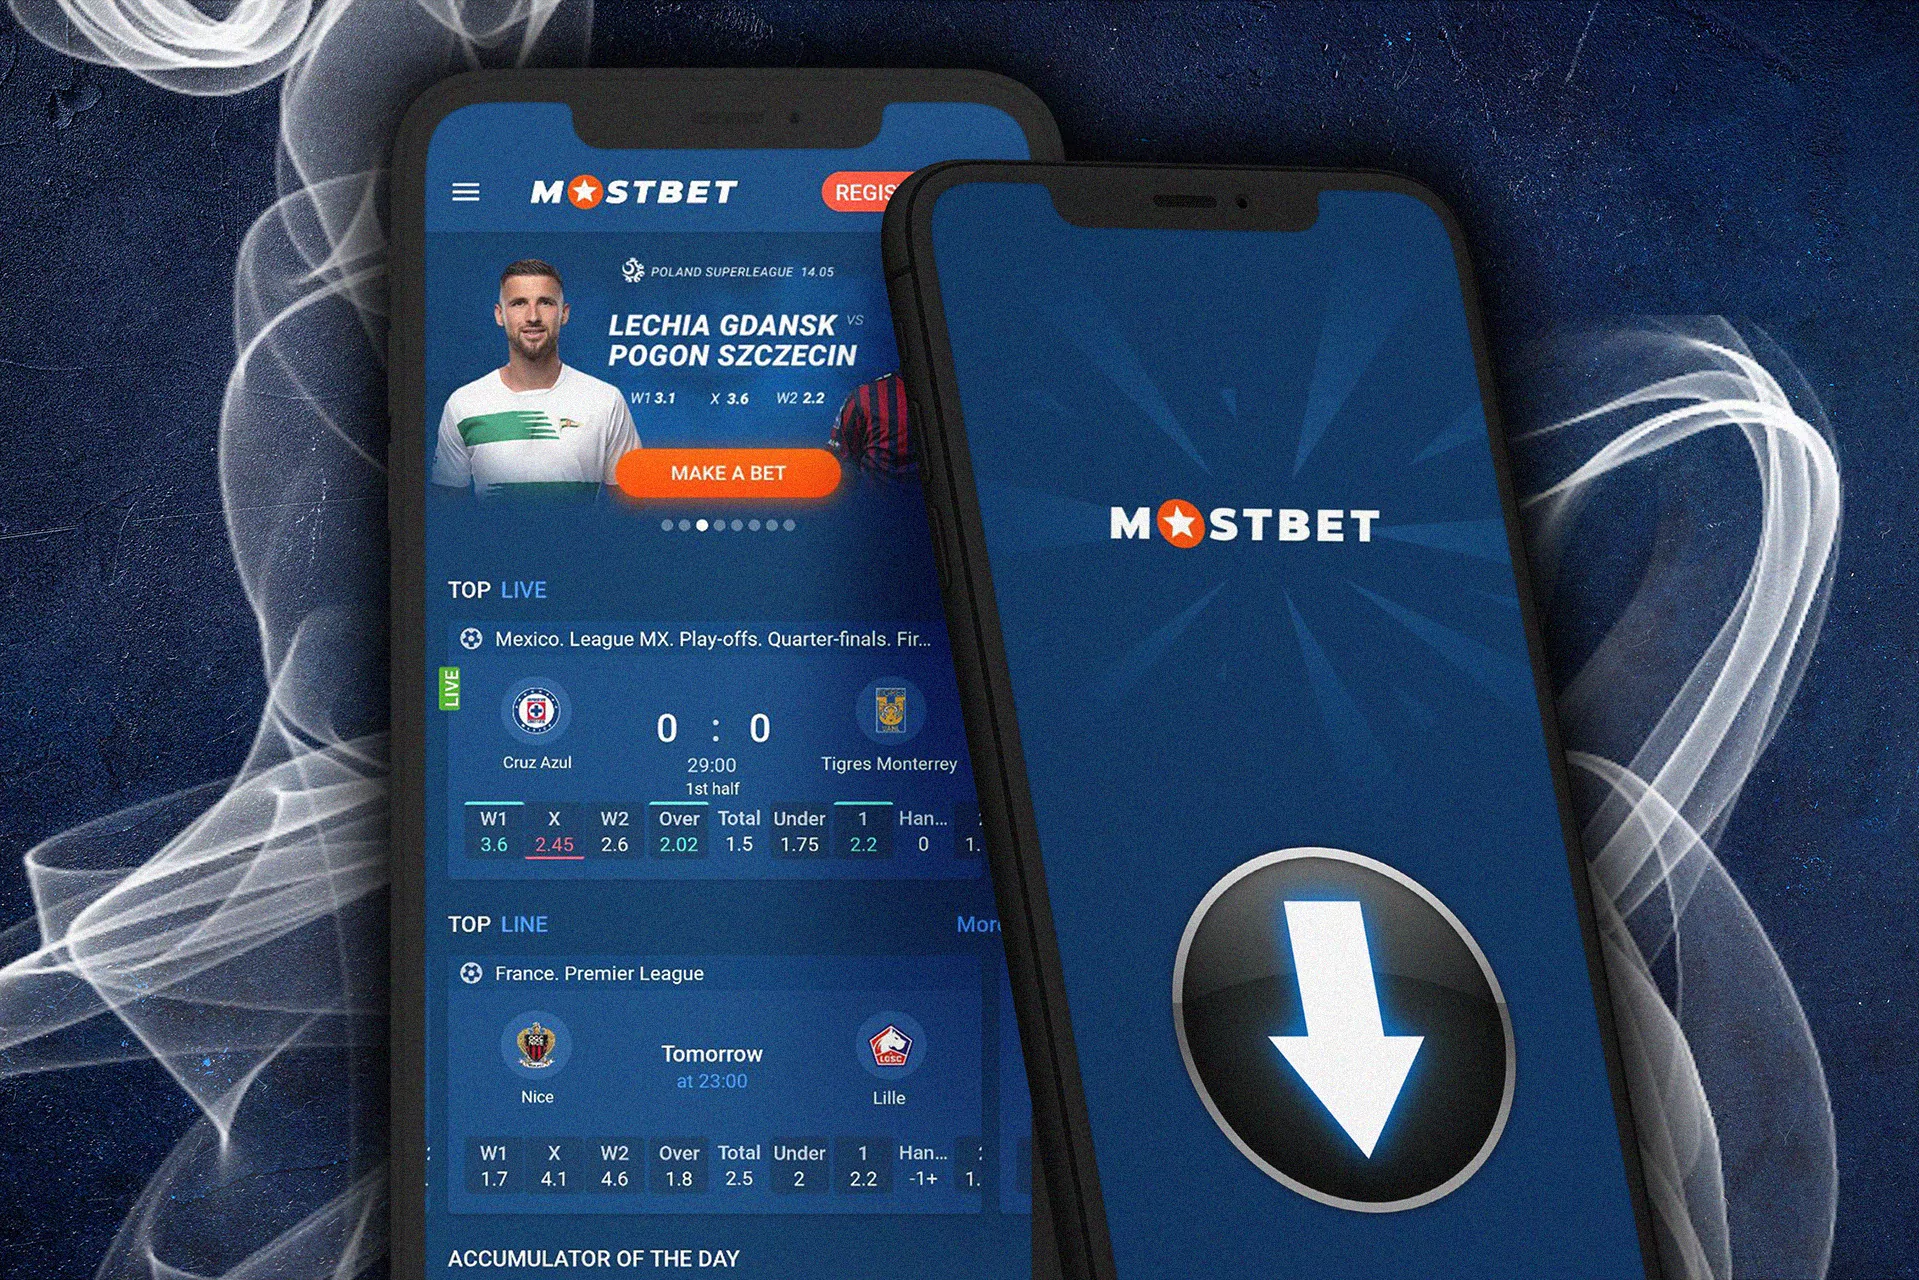 The mobile app Mostbet is available for download for Indian users.